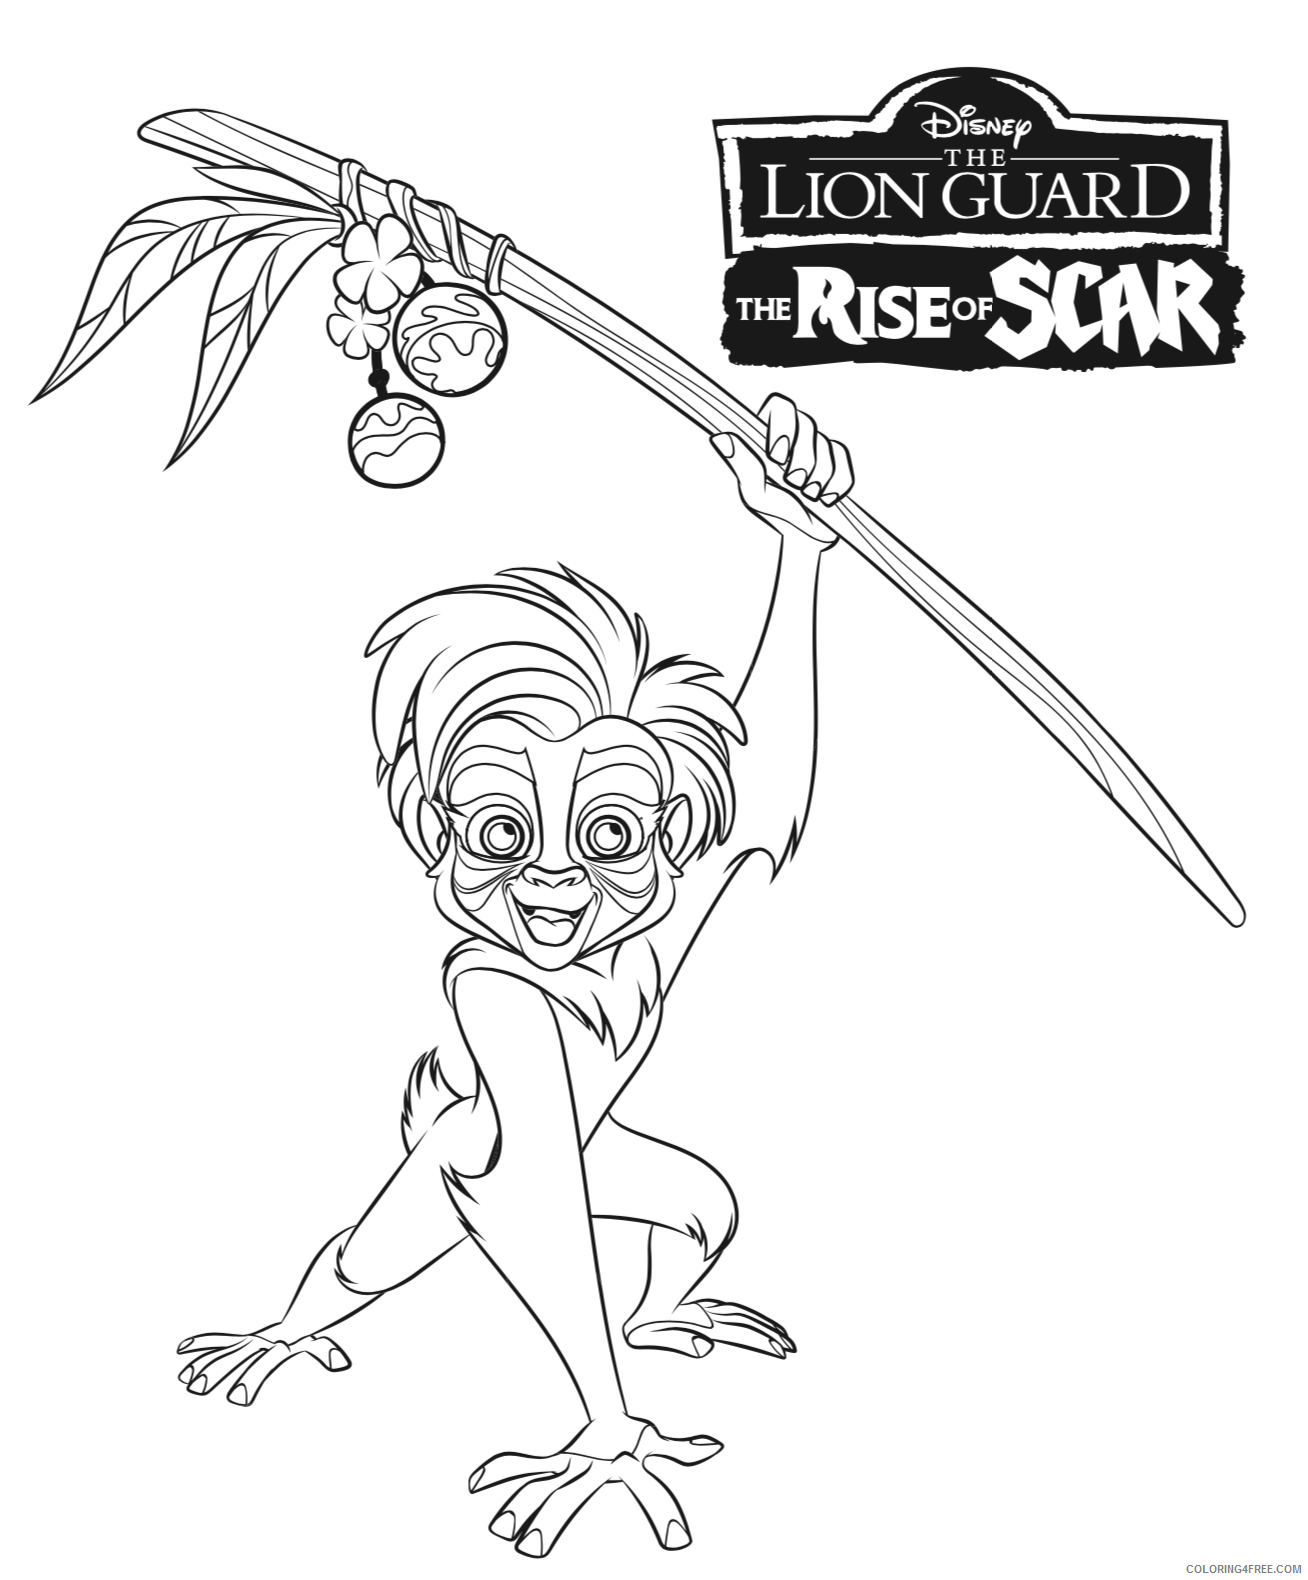 The Lion Guard Coloring Pages TV Film Rise of Scar Printable 2020 09106 Coloring4free